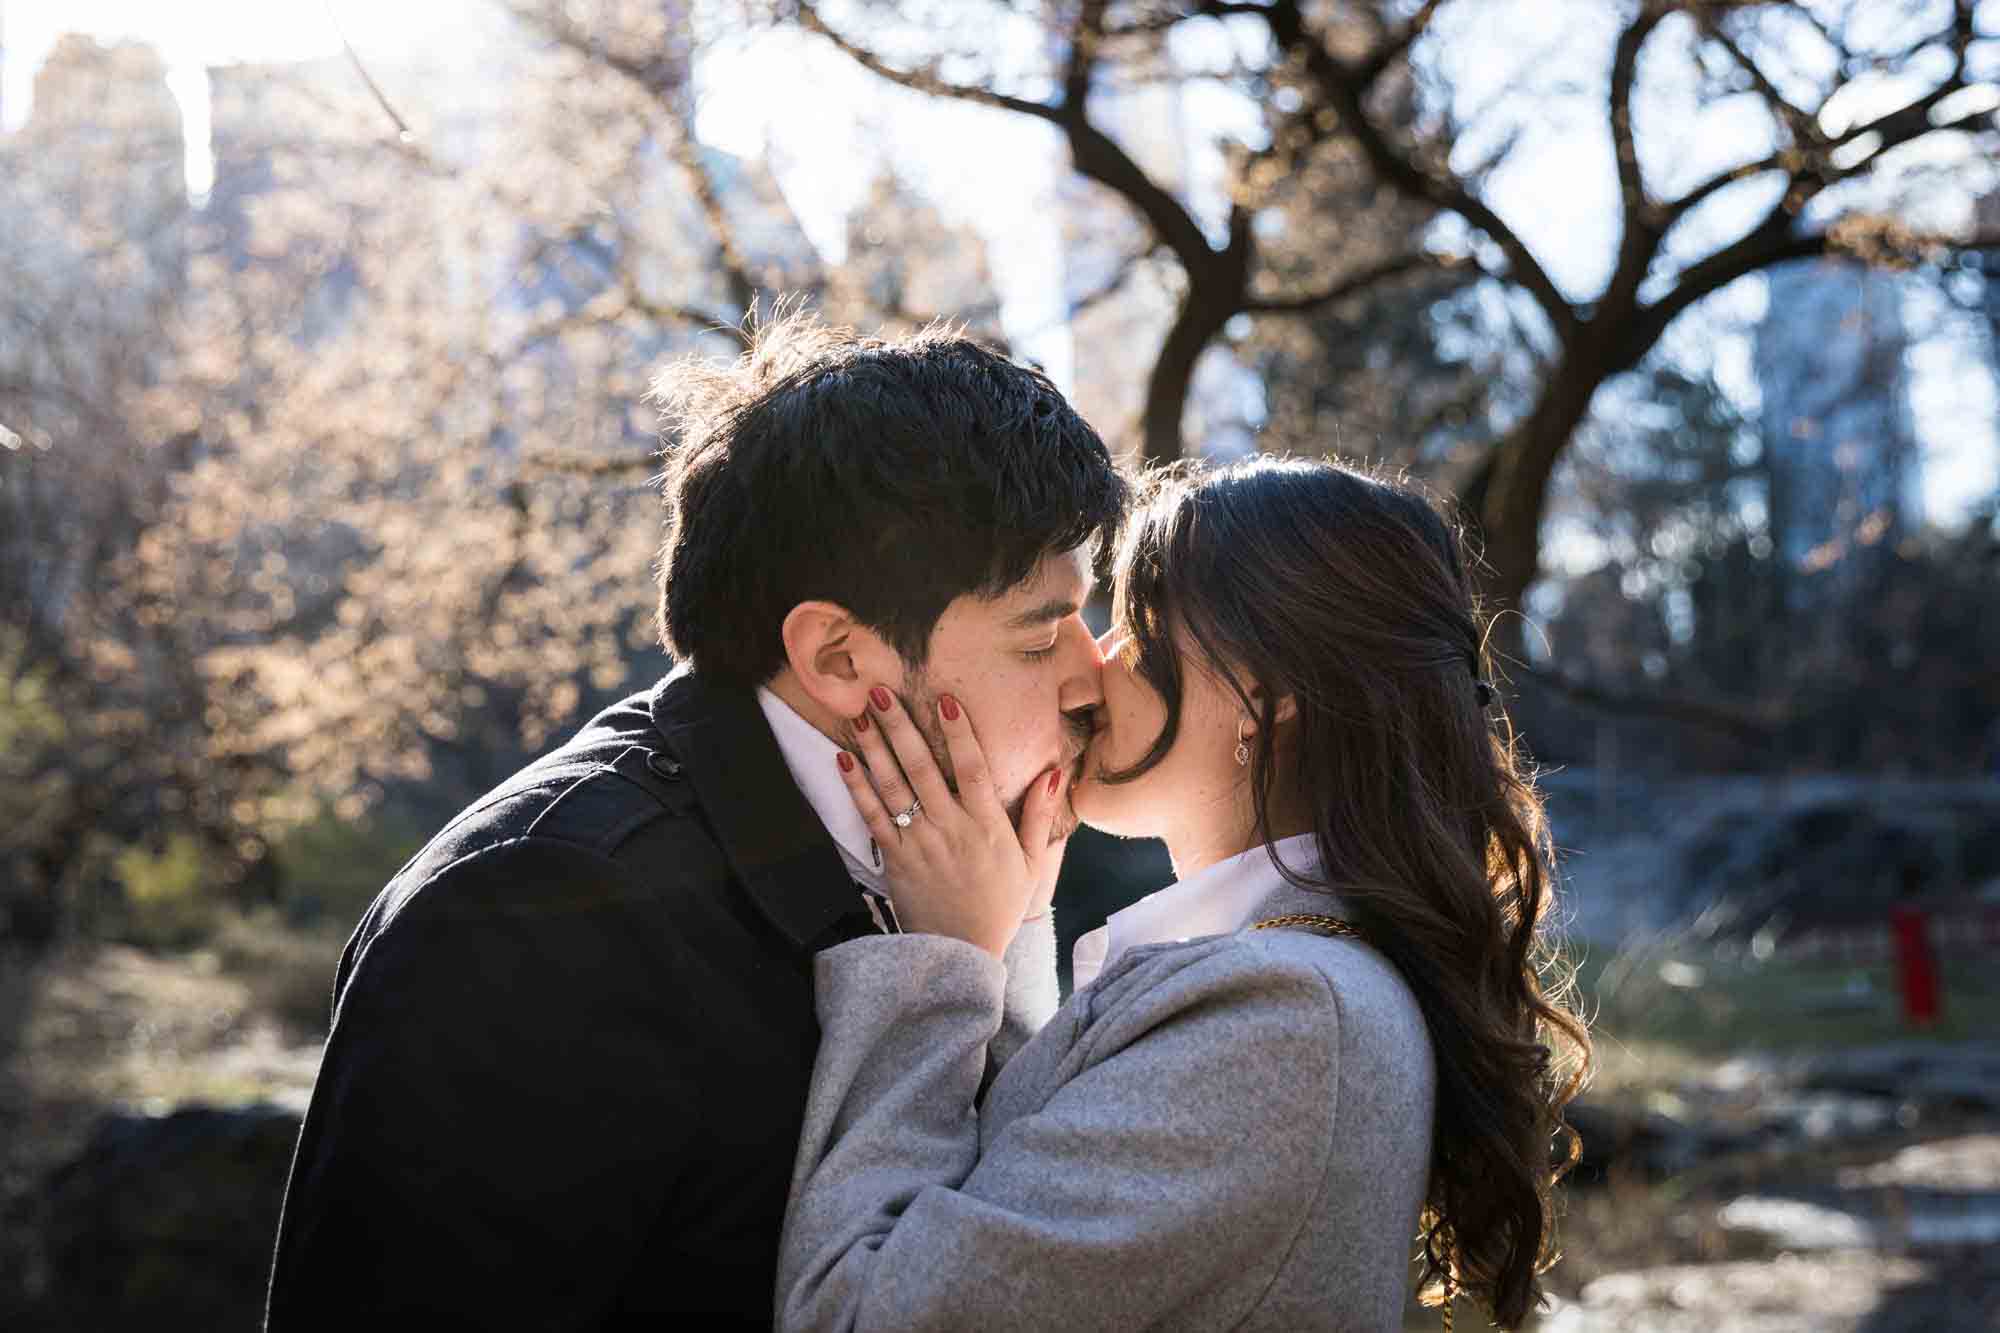 Man and woman kissing with woman's hand showing engagement ring during a Gapstow Bridge surprise proposal in Central Park